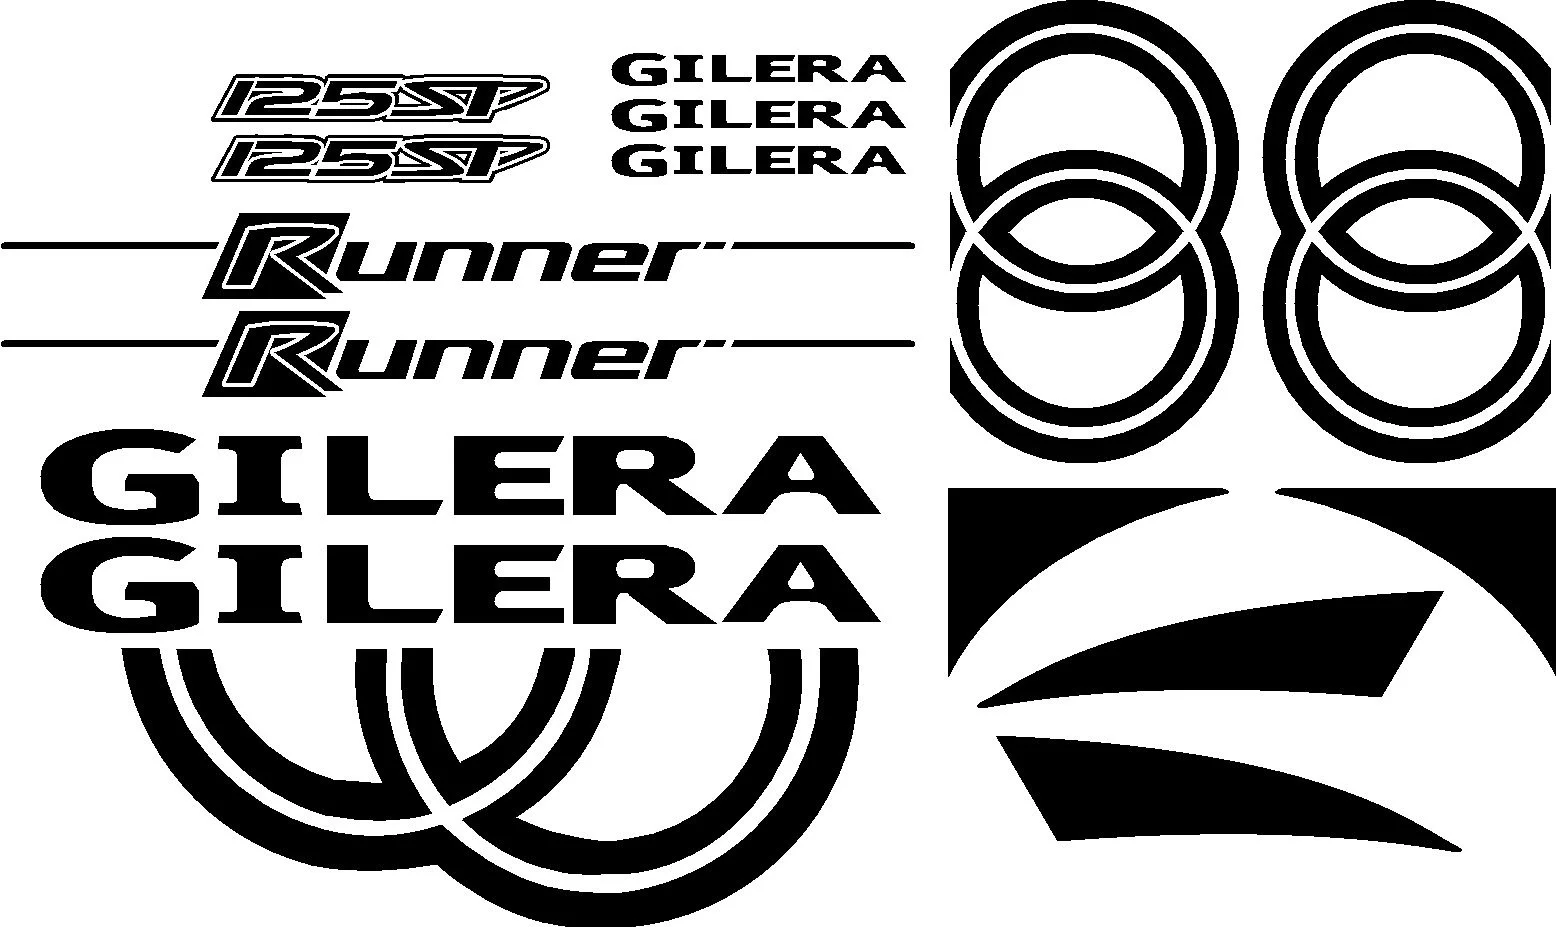 Jptz various sizes of gilera letter pattern polyethylene sticker, suitable for mopeds, bicycle decals ad exquisite decoration JP